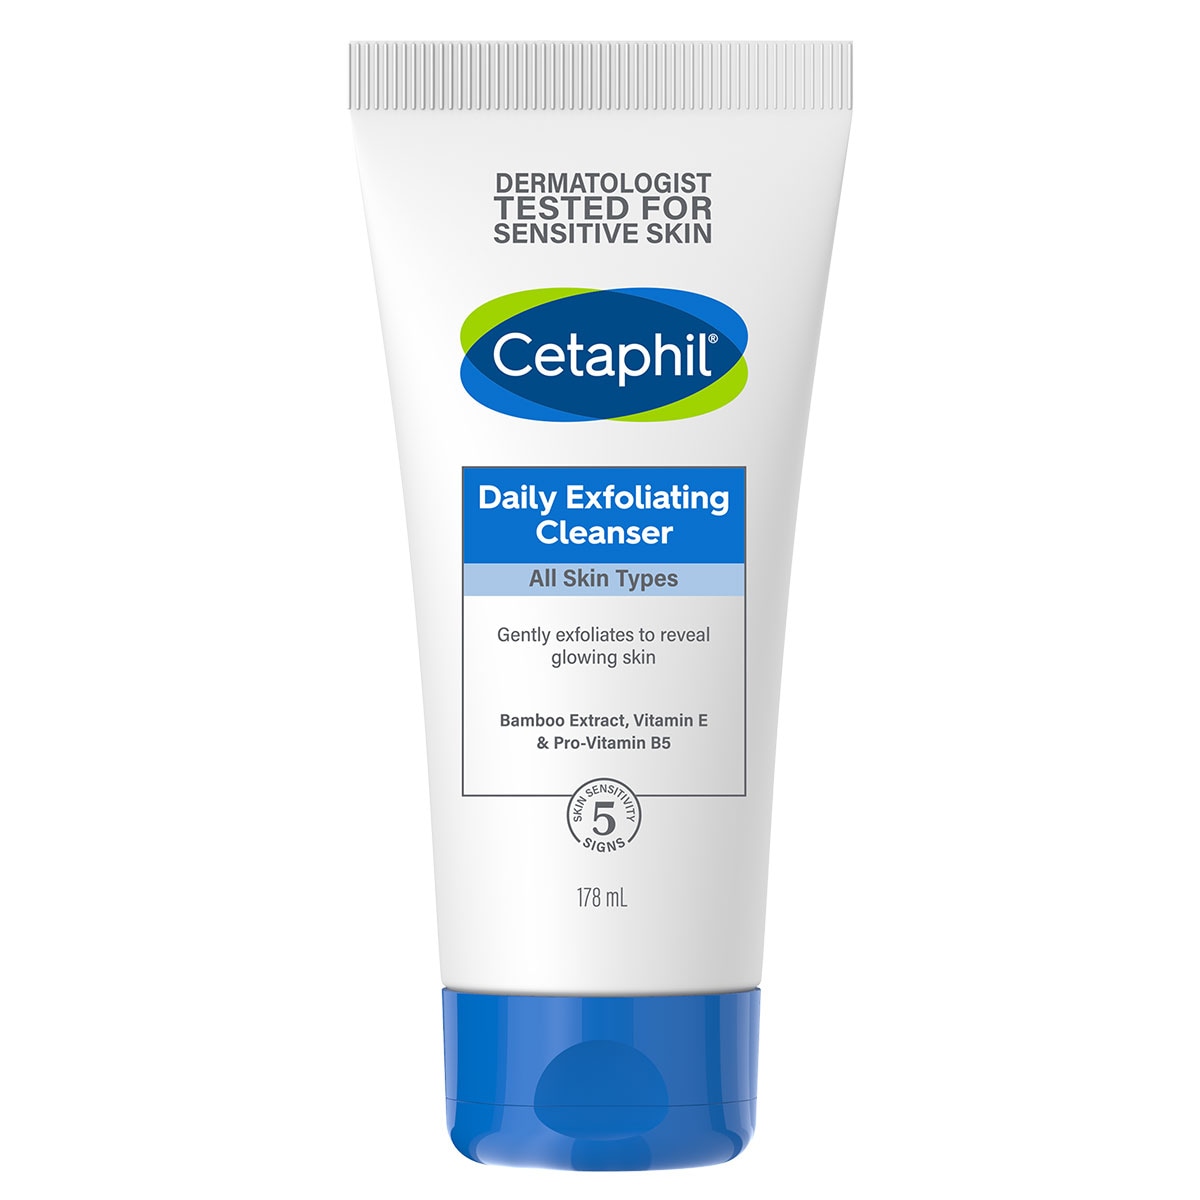 Cetaphil Daily Exfoliating Facial Cleanser 178ml